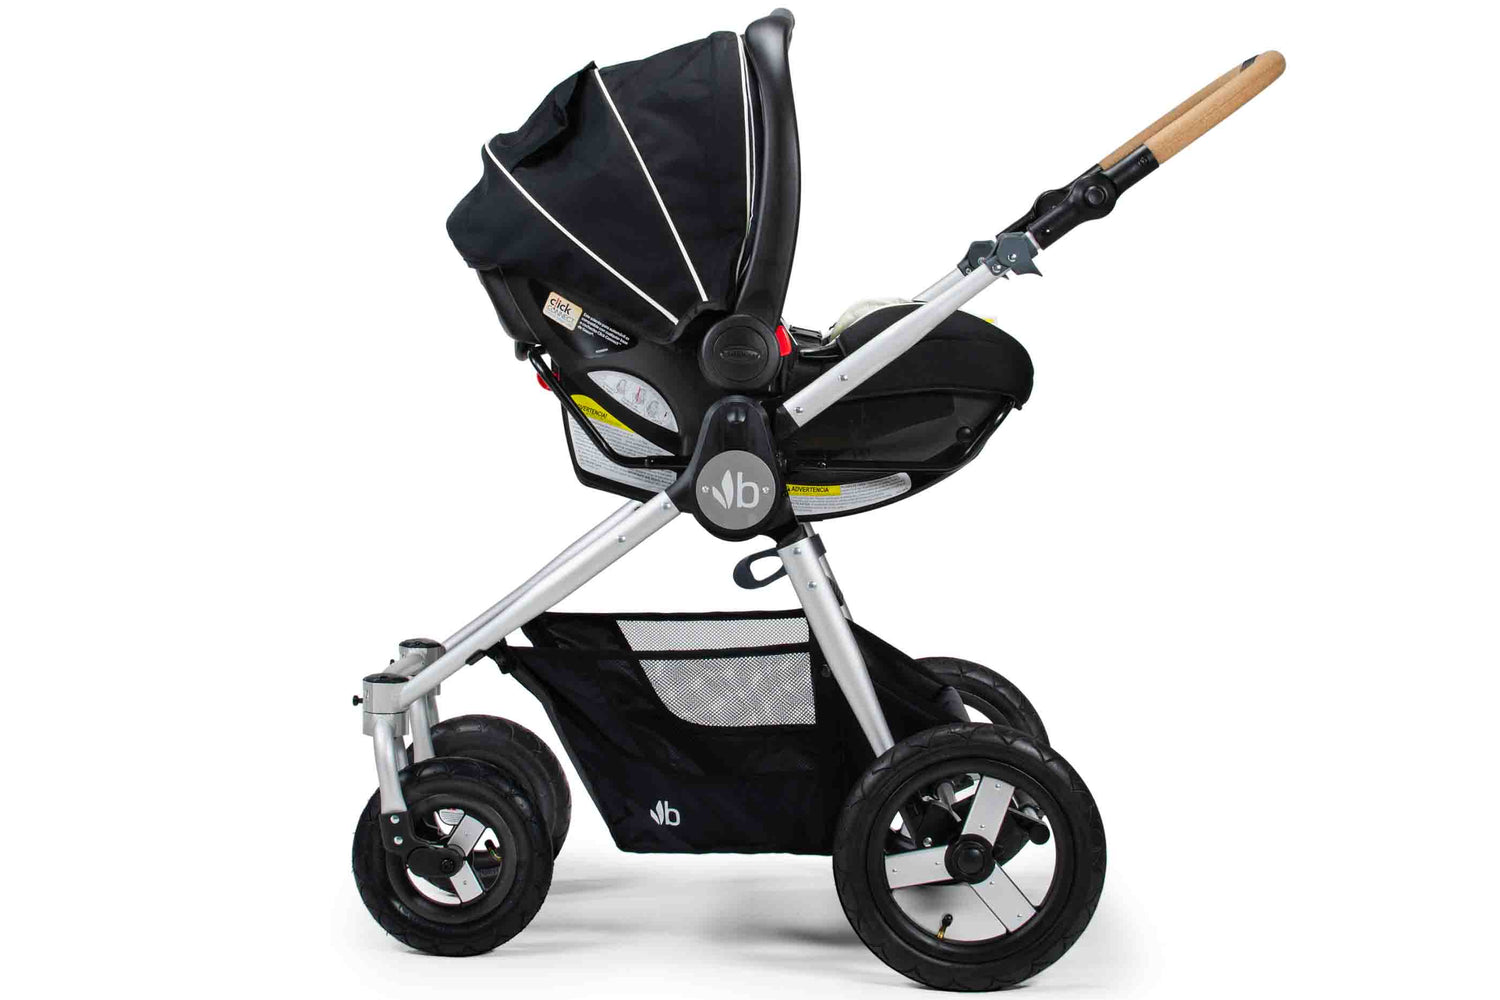 graco car seat for stroller